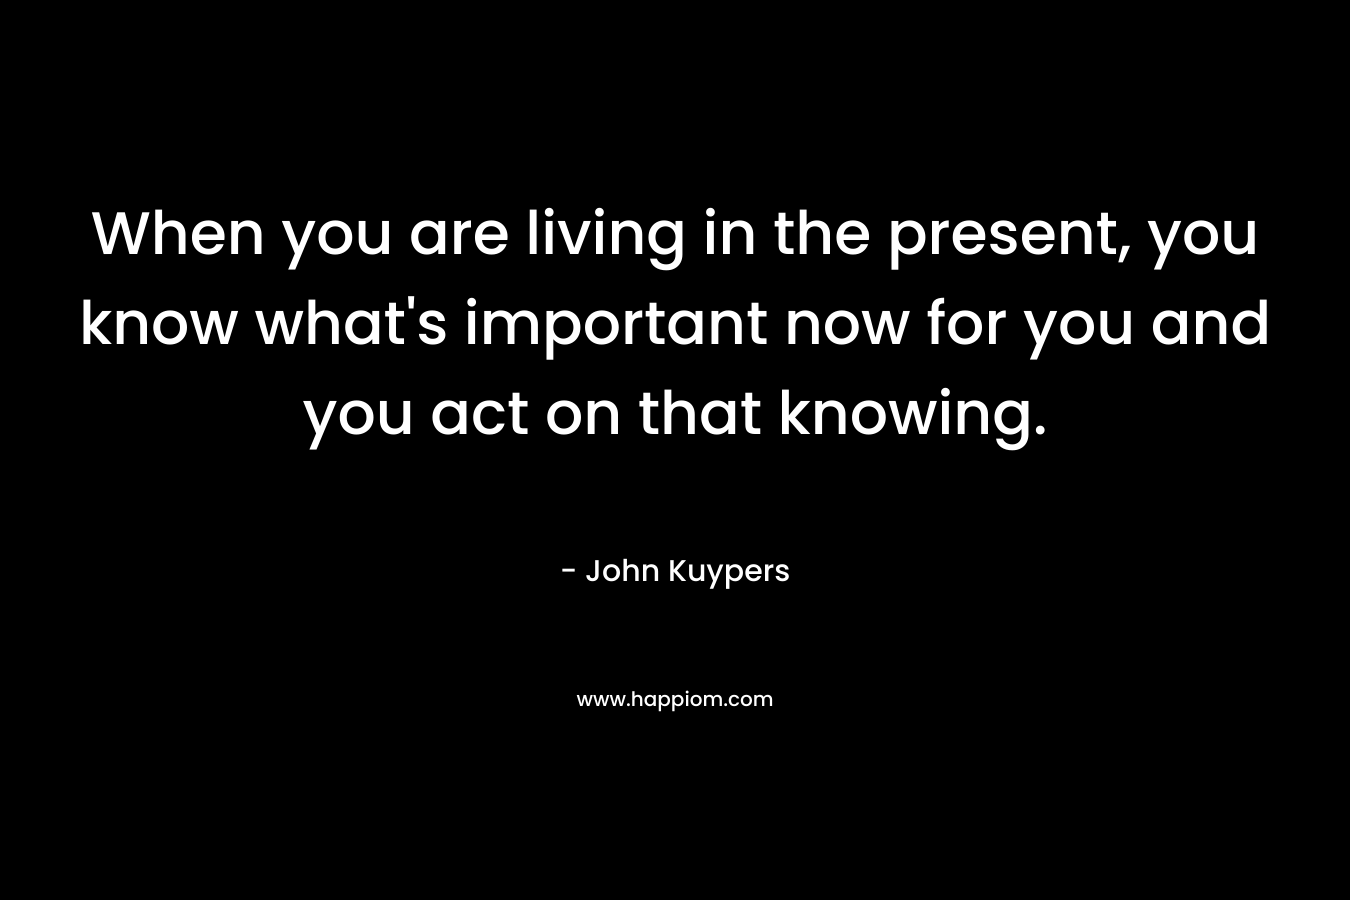 When you are living in the present, you know what’s important now for you and you act on that knowing. – John Kuypers